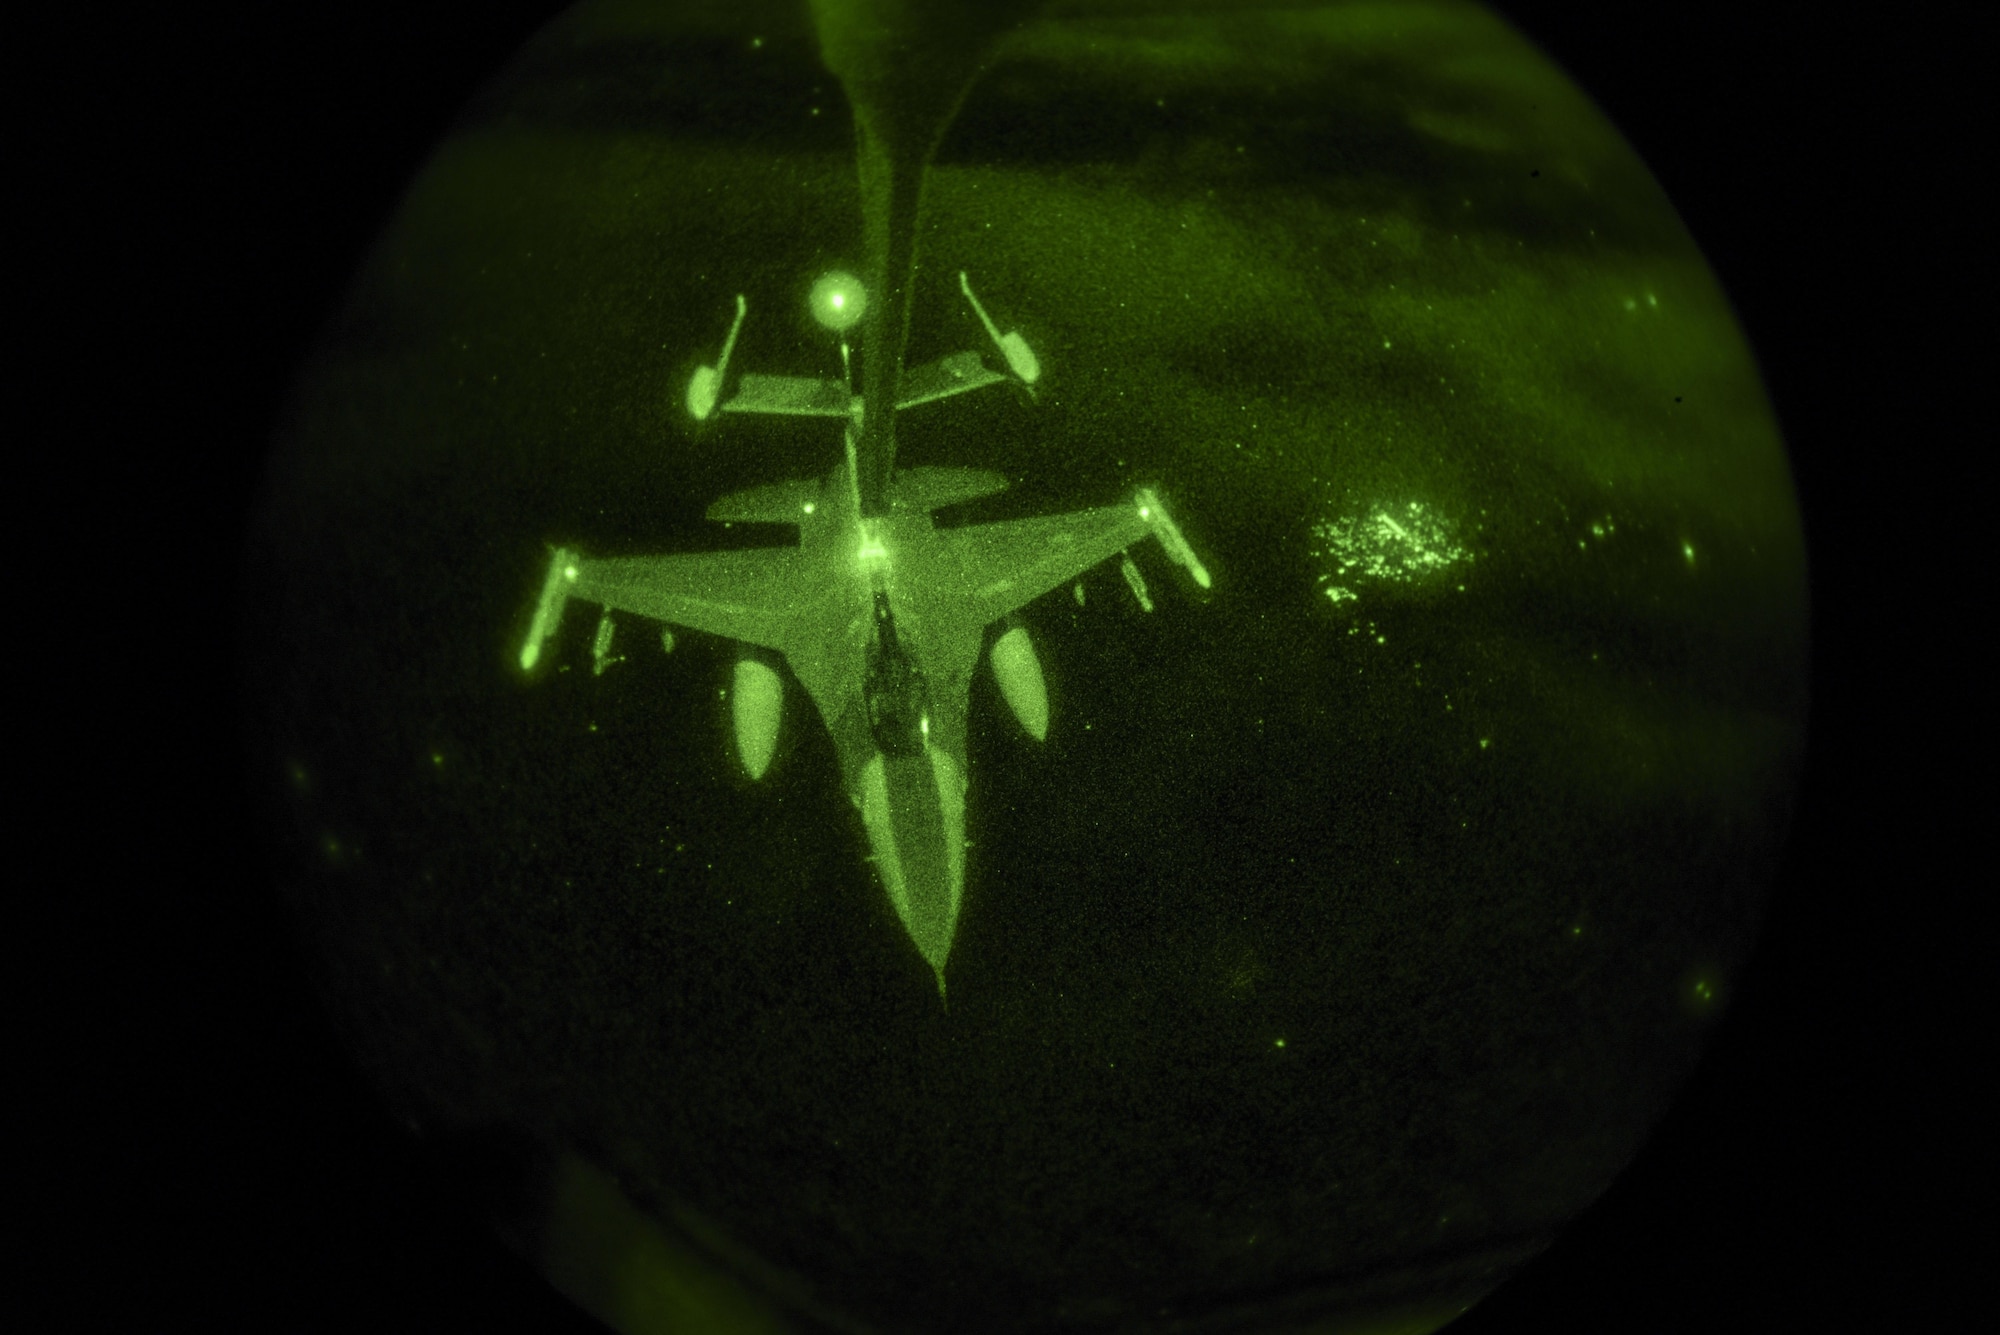 An F-16 Falcon refuels midair during exercise Combat Raider at the Powder River Training Complex near Belle Fouche S.D., on Nov. 15, 2016. Combat Raider is a large force exercise testing several agency’s cohesion and coordination while completing several large-scale objectives. (U.S. Air Force photo by Airman 1st Class Randahl J. Jenson)